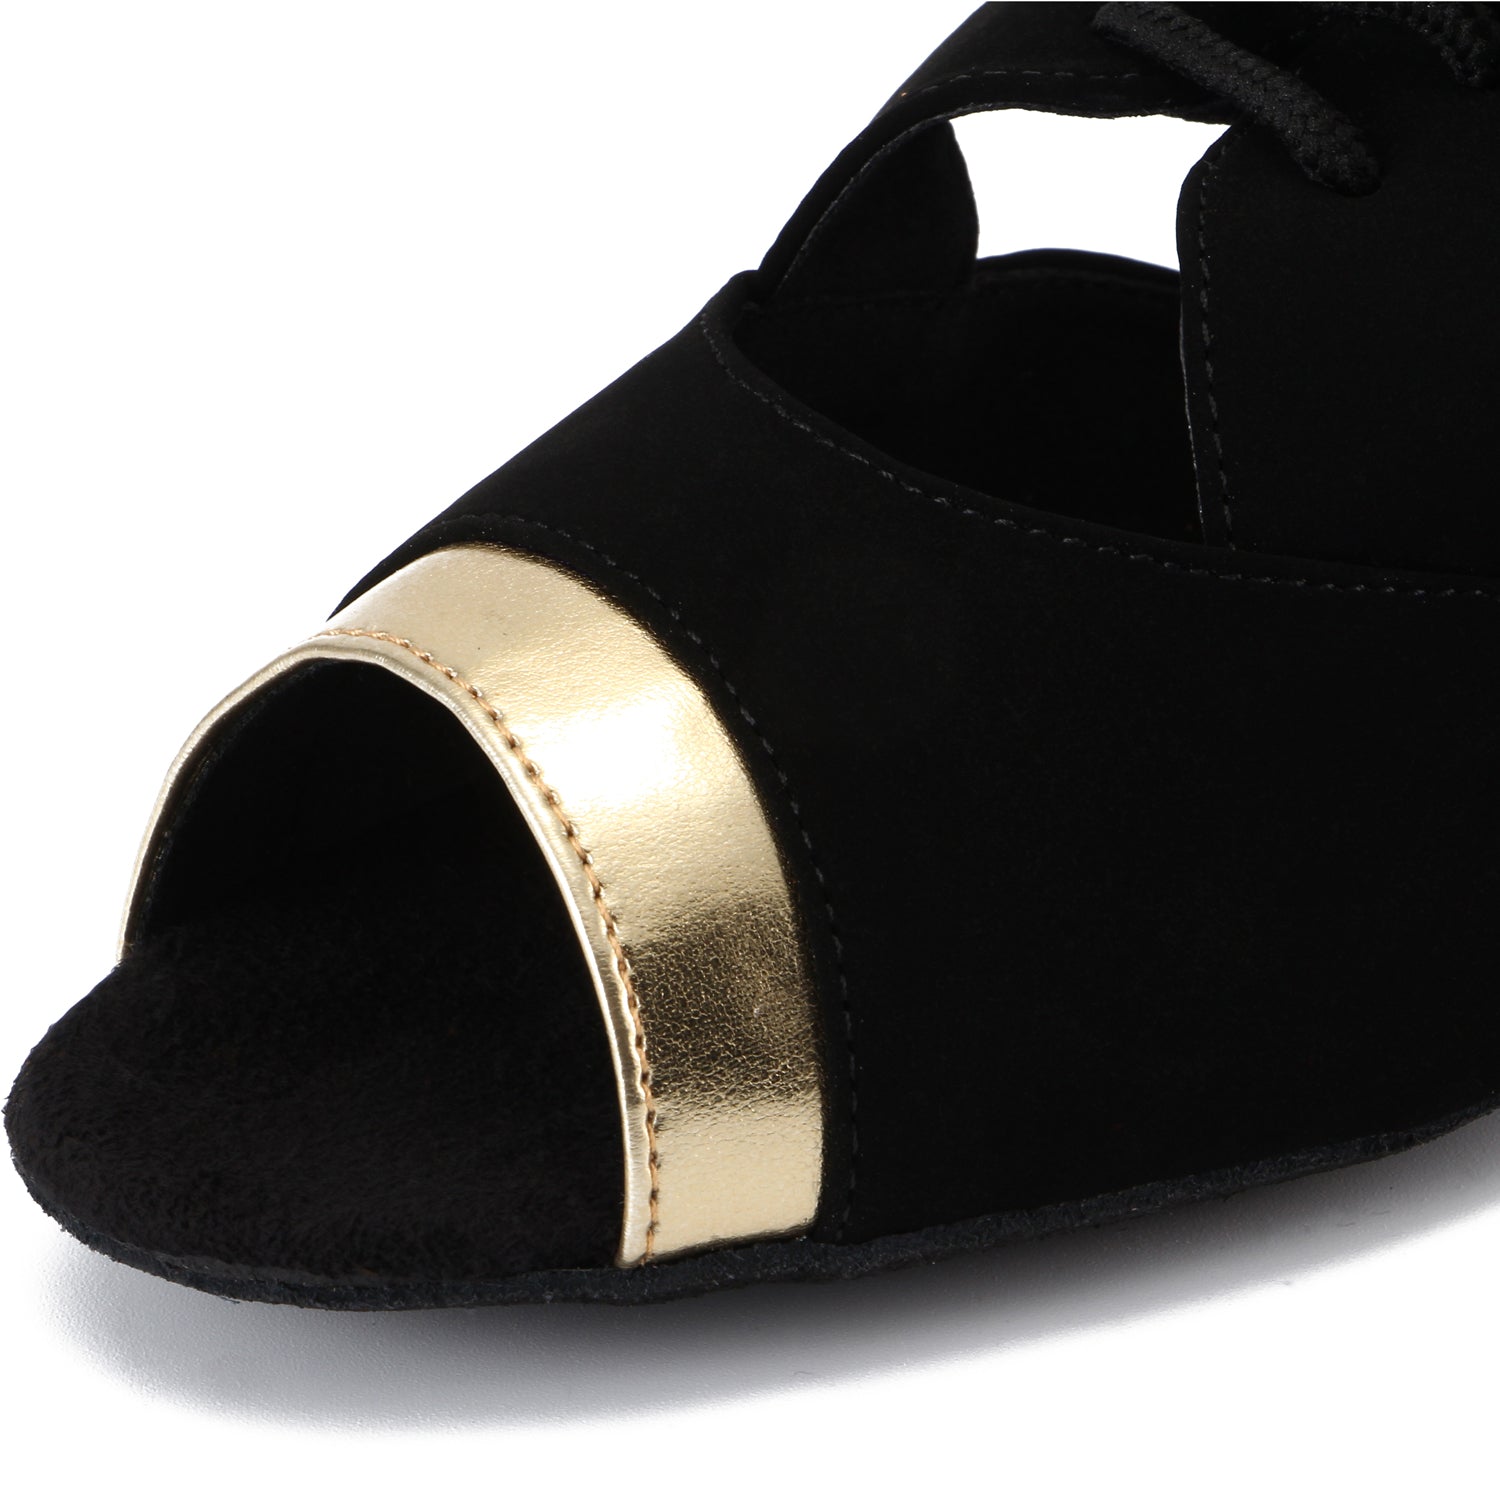 Women Ballroom Dancing Shoes with Suede Sole, Lace-up Open-toe Design in Black and Gold for Tango Latin Practice (PD-3004A)2